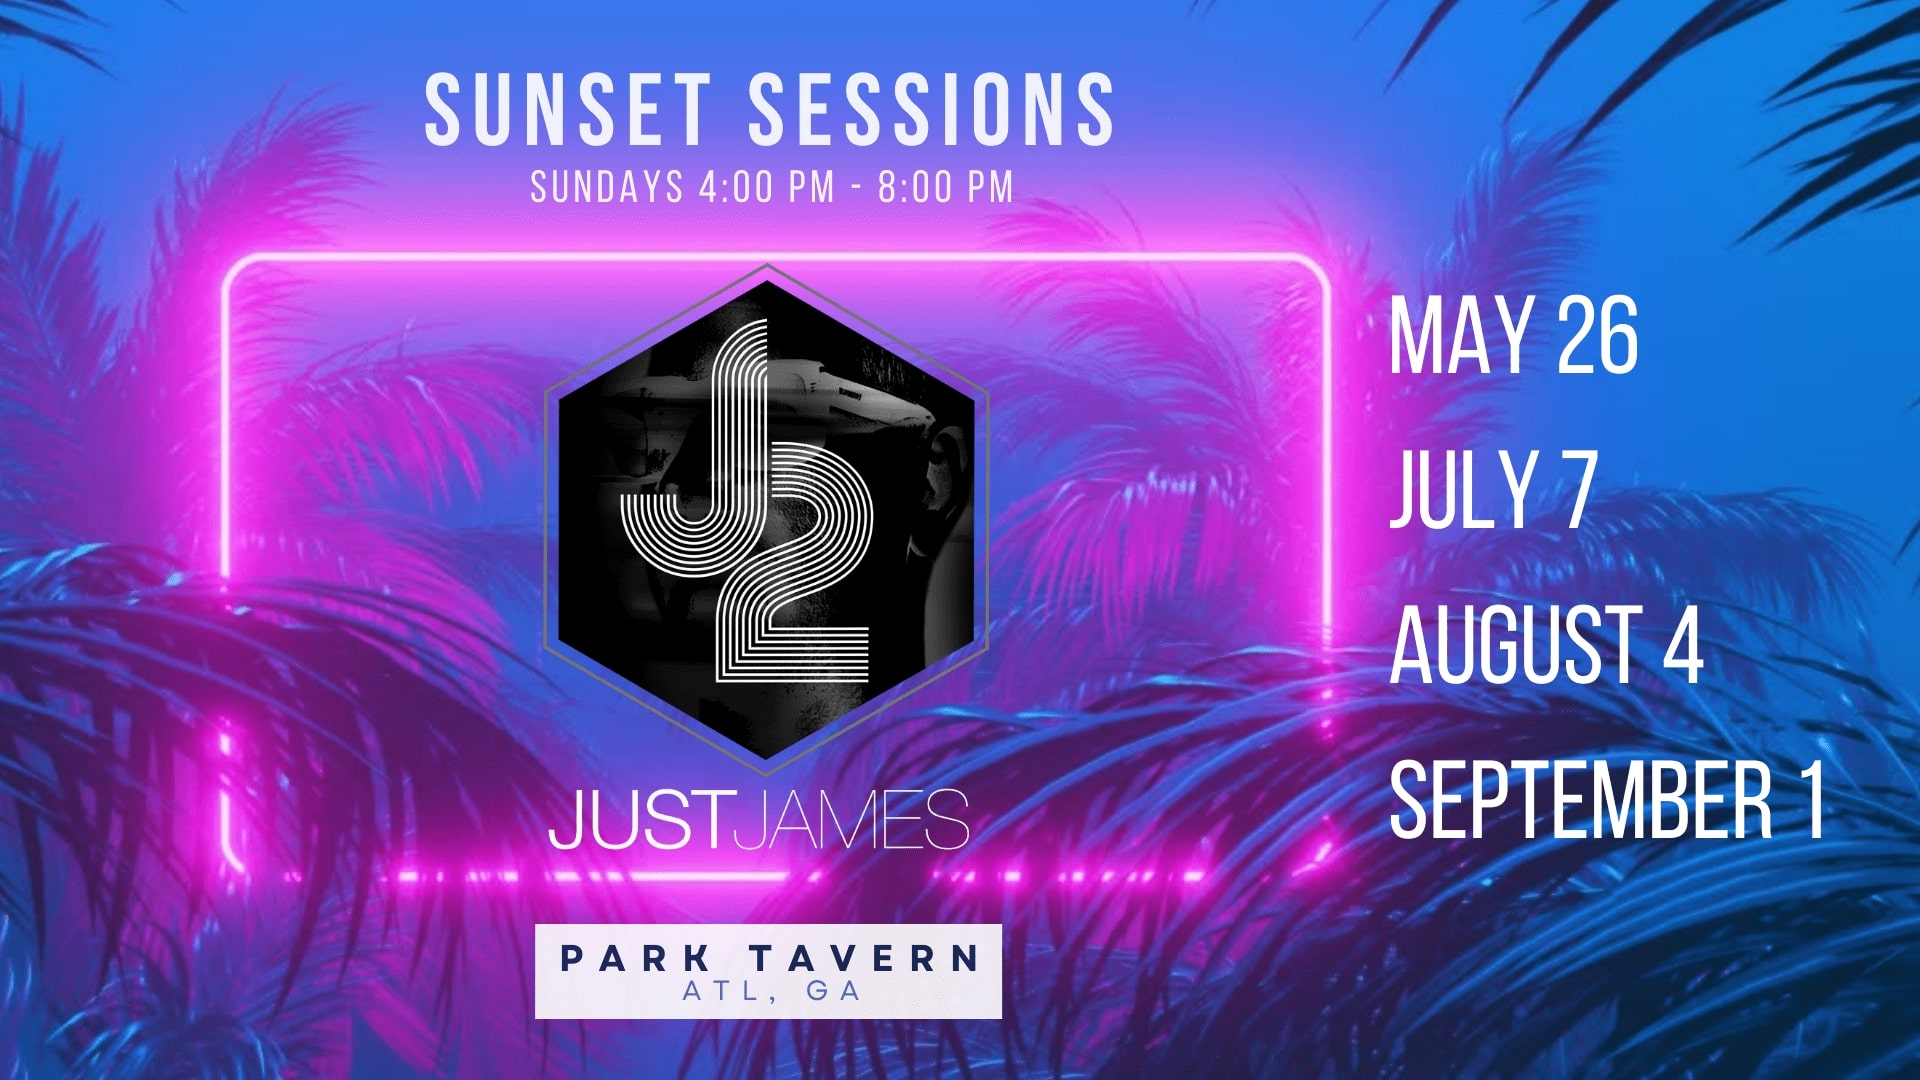 Just James Sunset Sessions - May 26, July 7, August 4, September 1